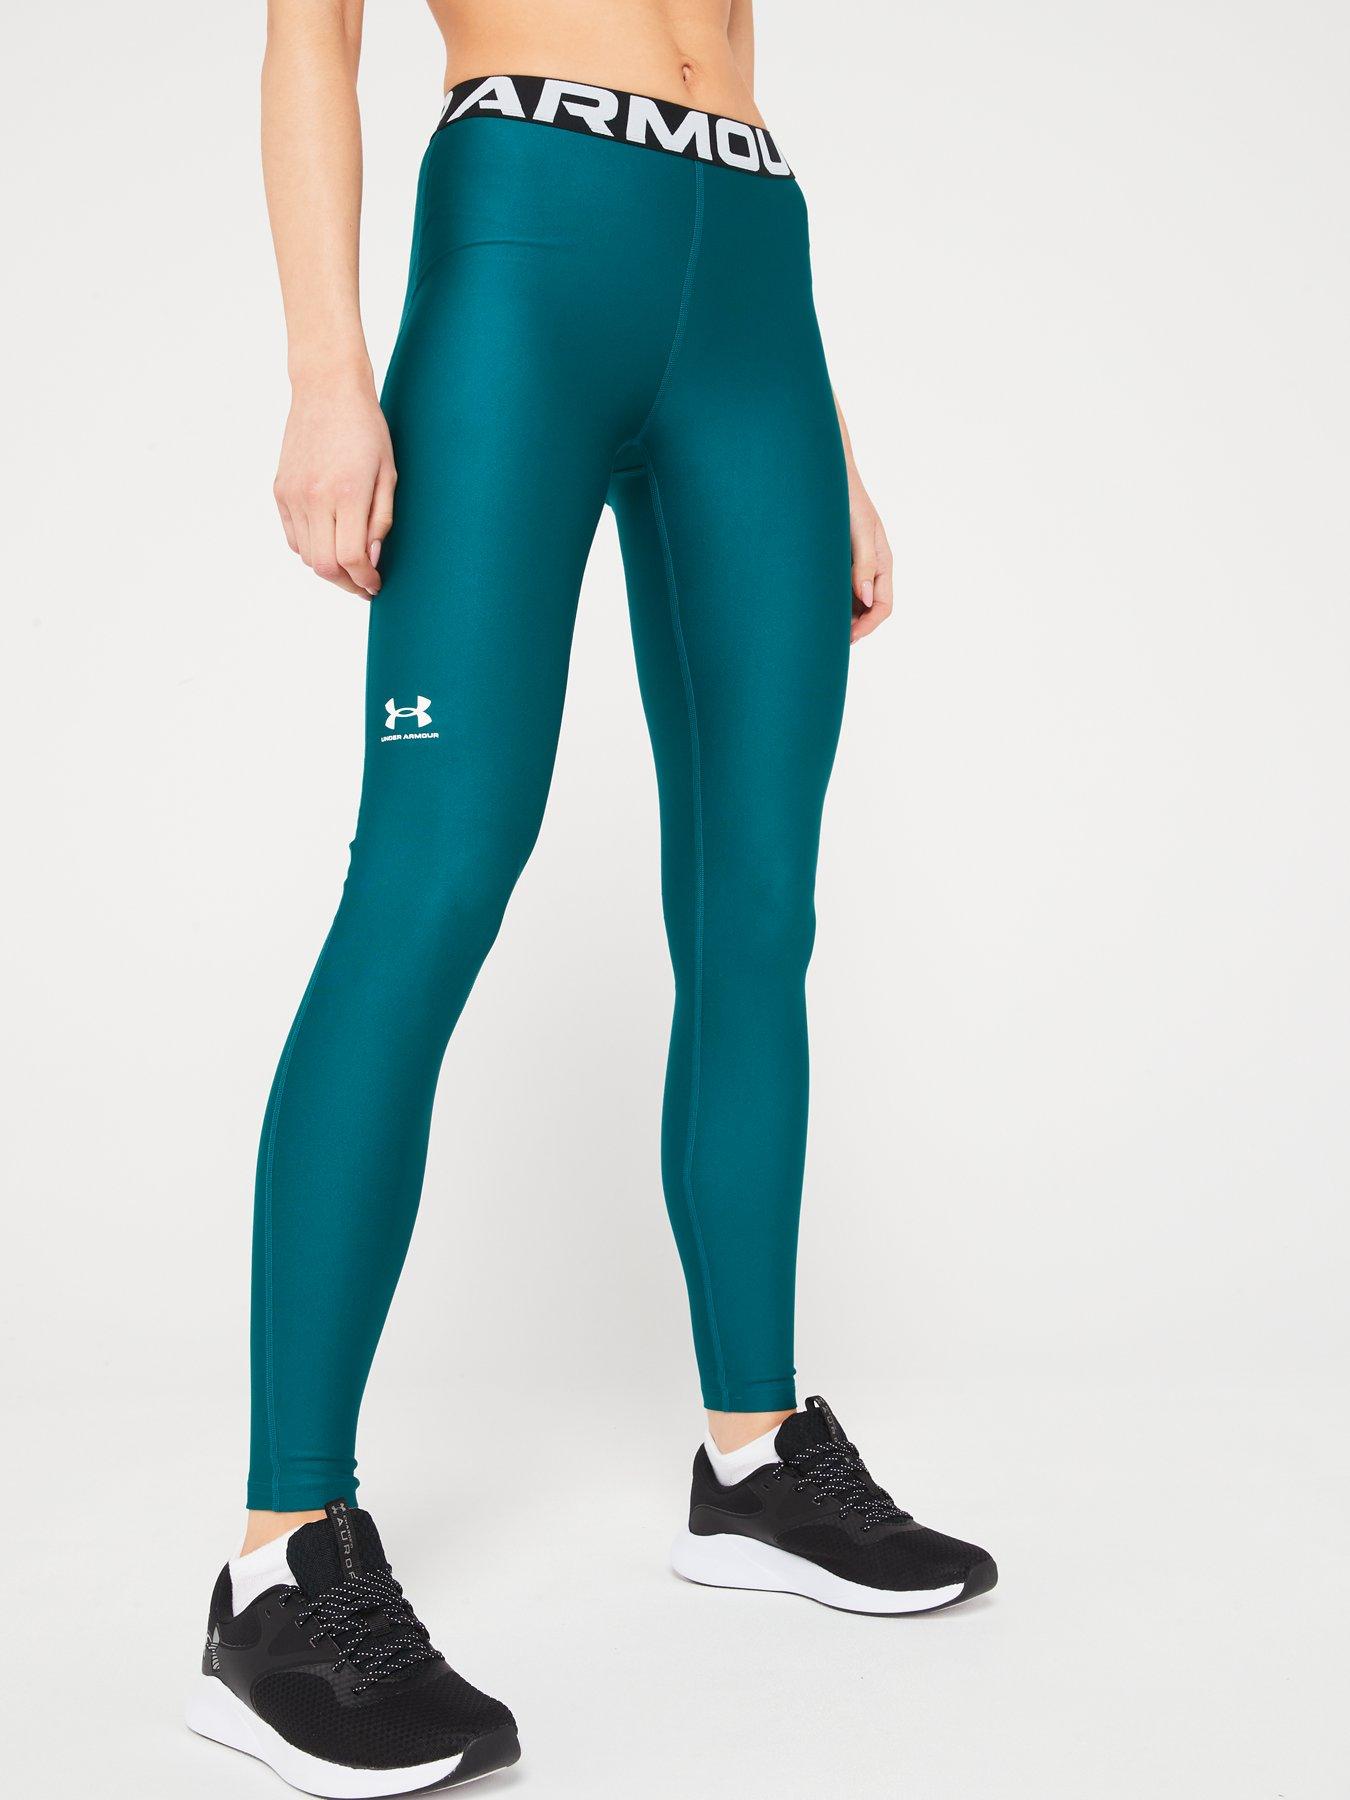 Under Armour Women's Project Rock 7/8 Leggings (Toddy Green, X